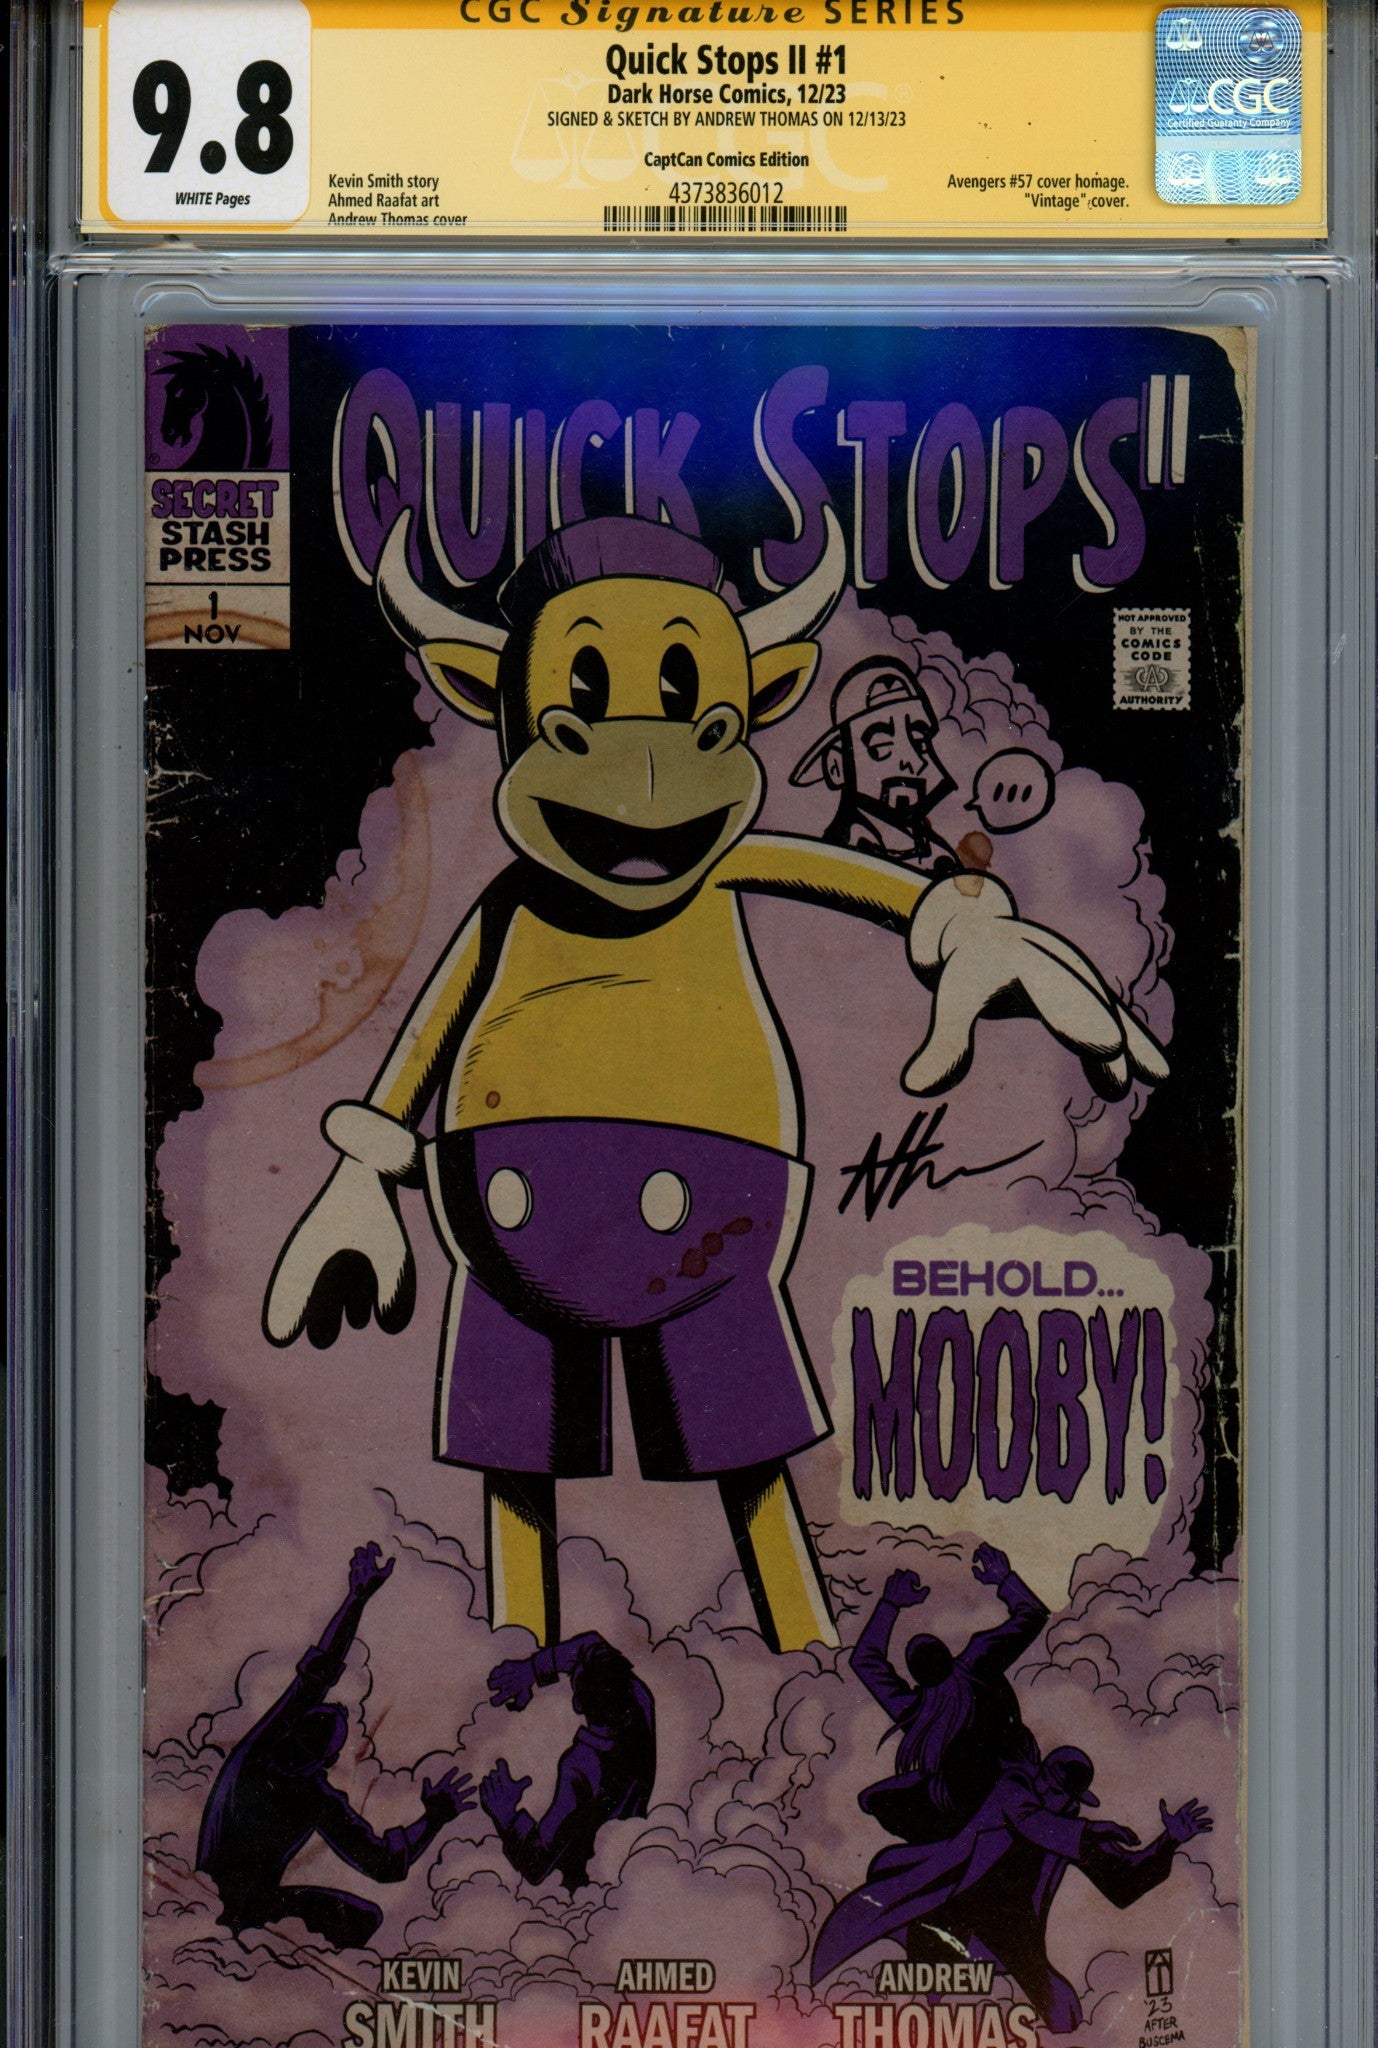 Quick Stops II 1 CGC 9.8 (NM/M) Silent Bob Sketch (2023) Thomas Homage Exclusive Variant Signed / Remarked x1 Cover Andrew Thomas 